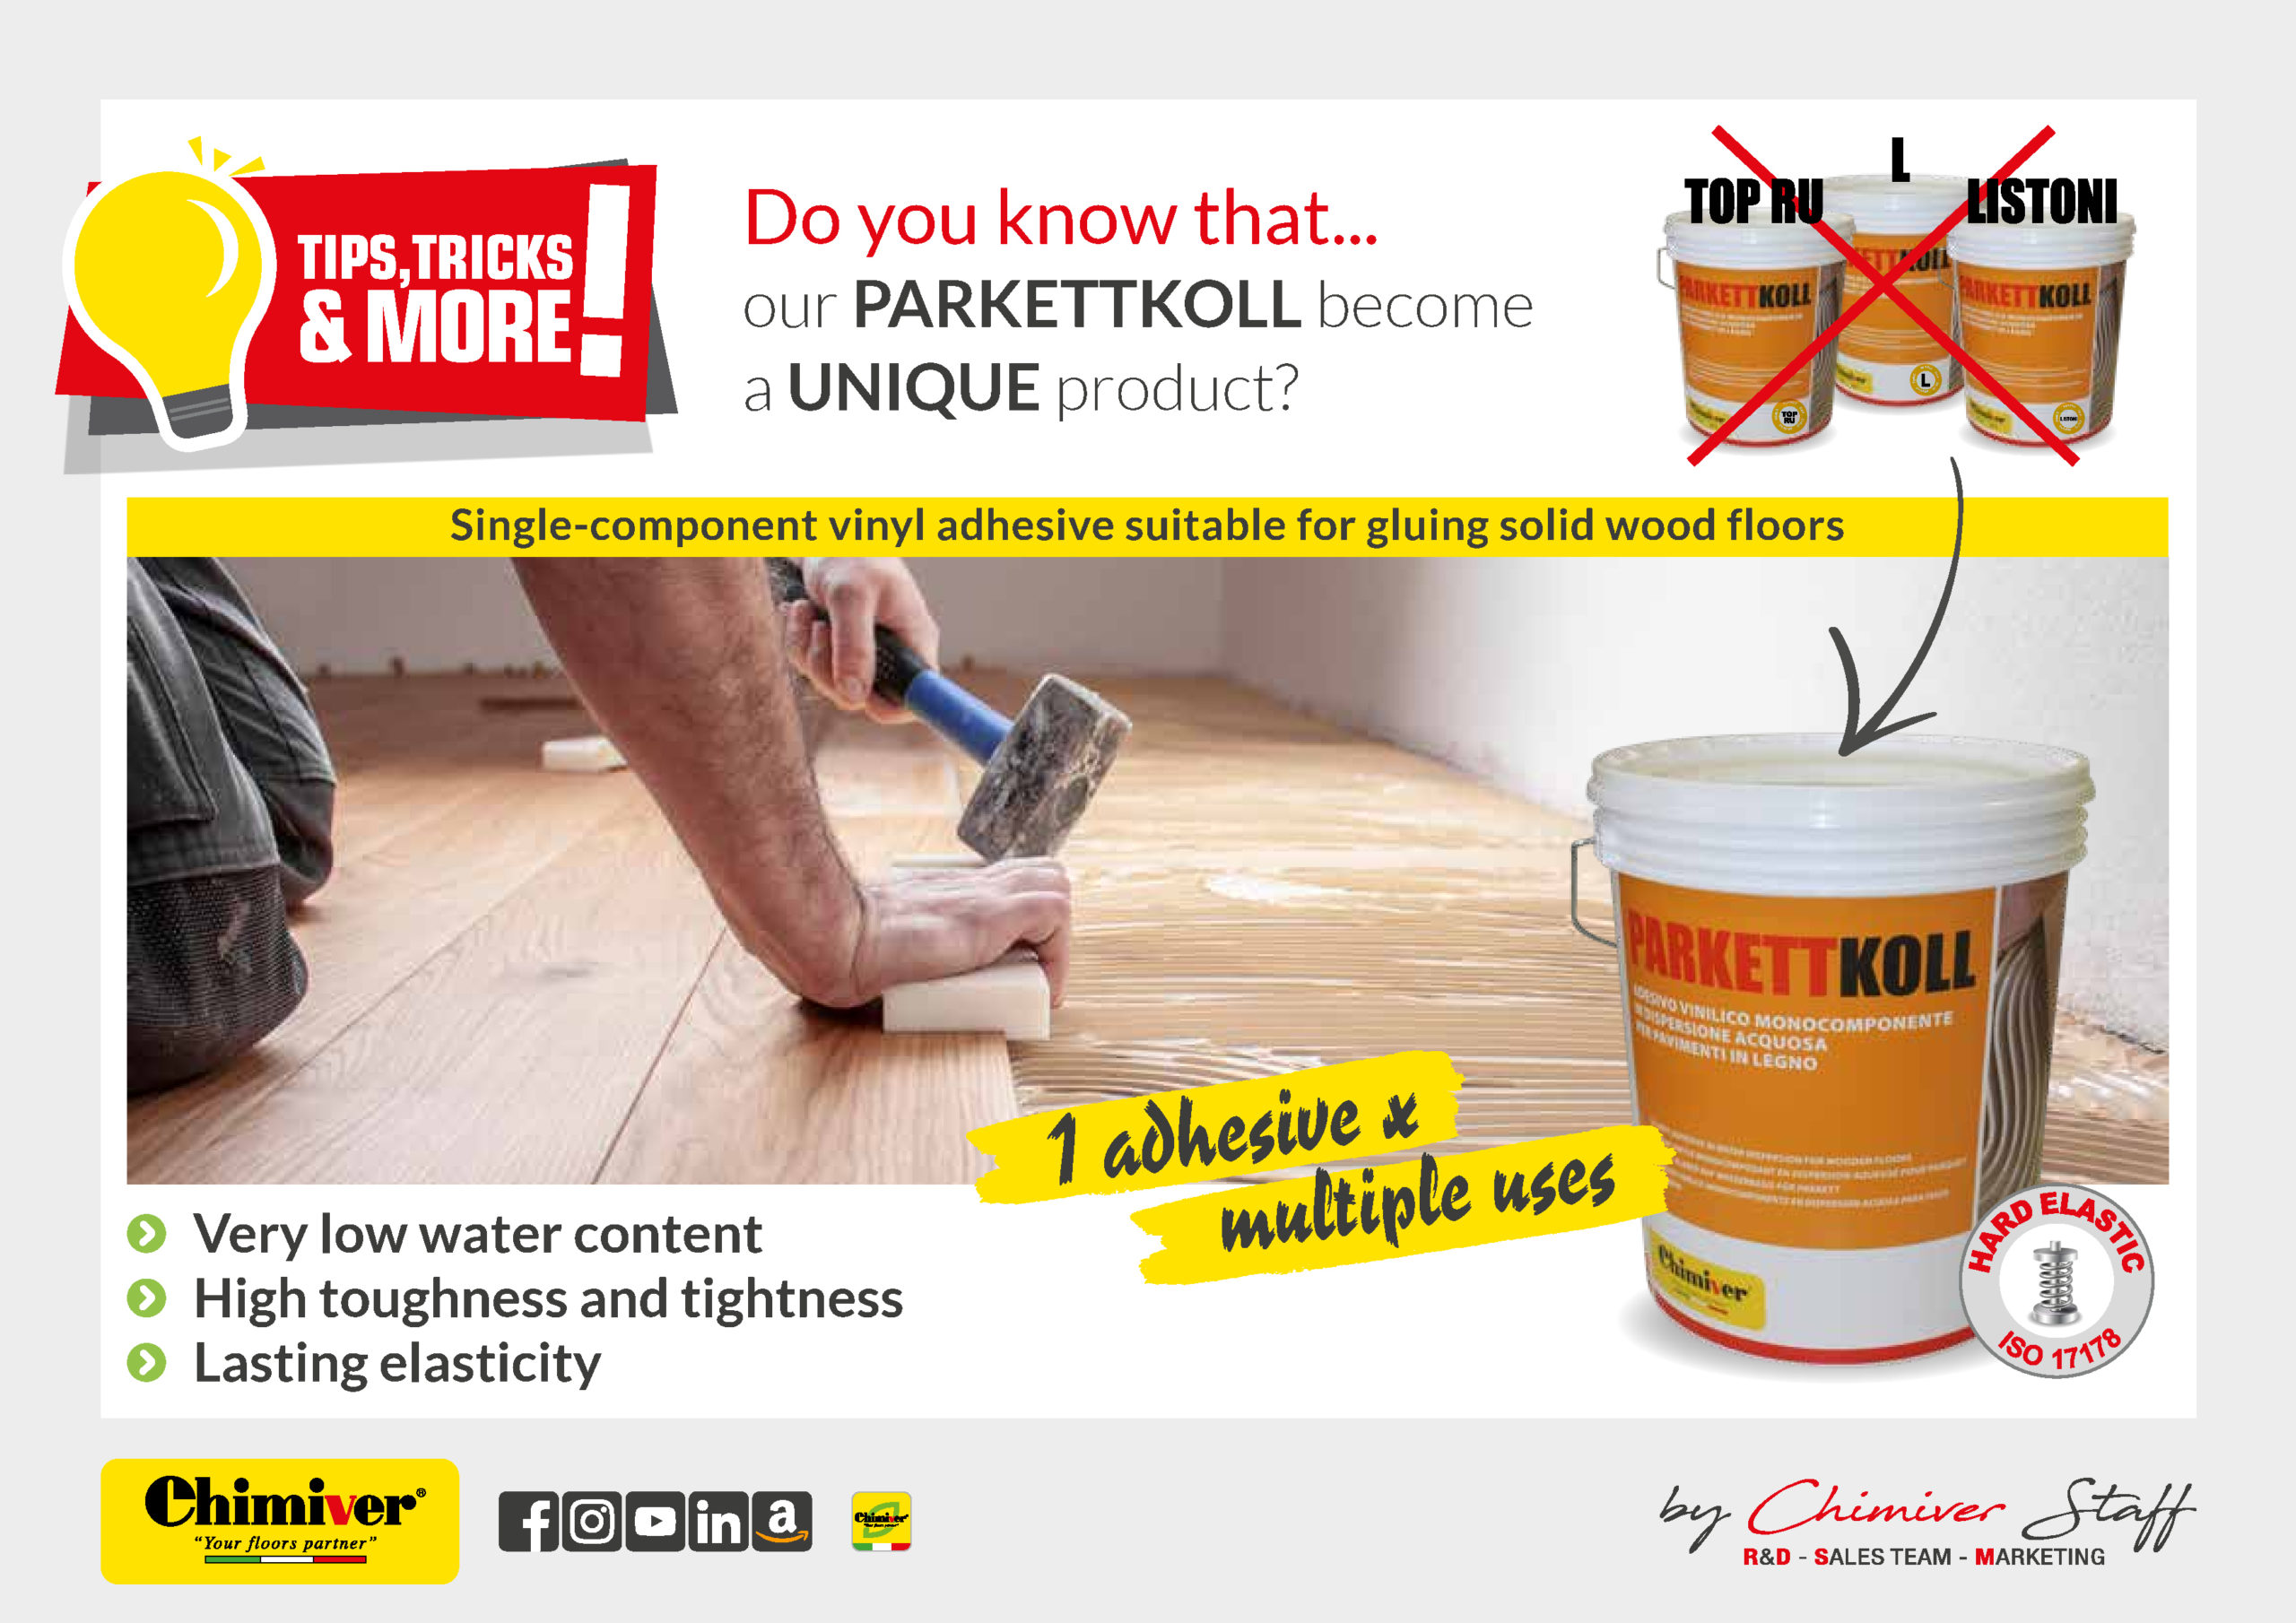 PARKETTKOLL: the new Chimiver universal adhesive for gluing parquet